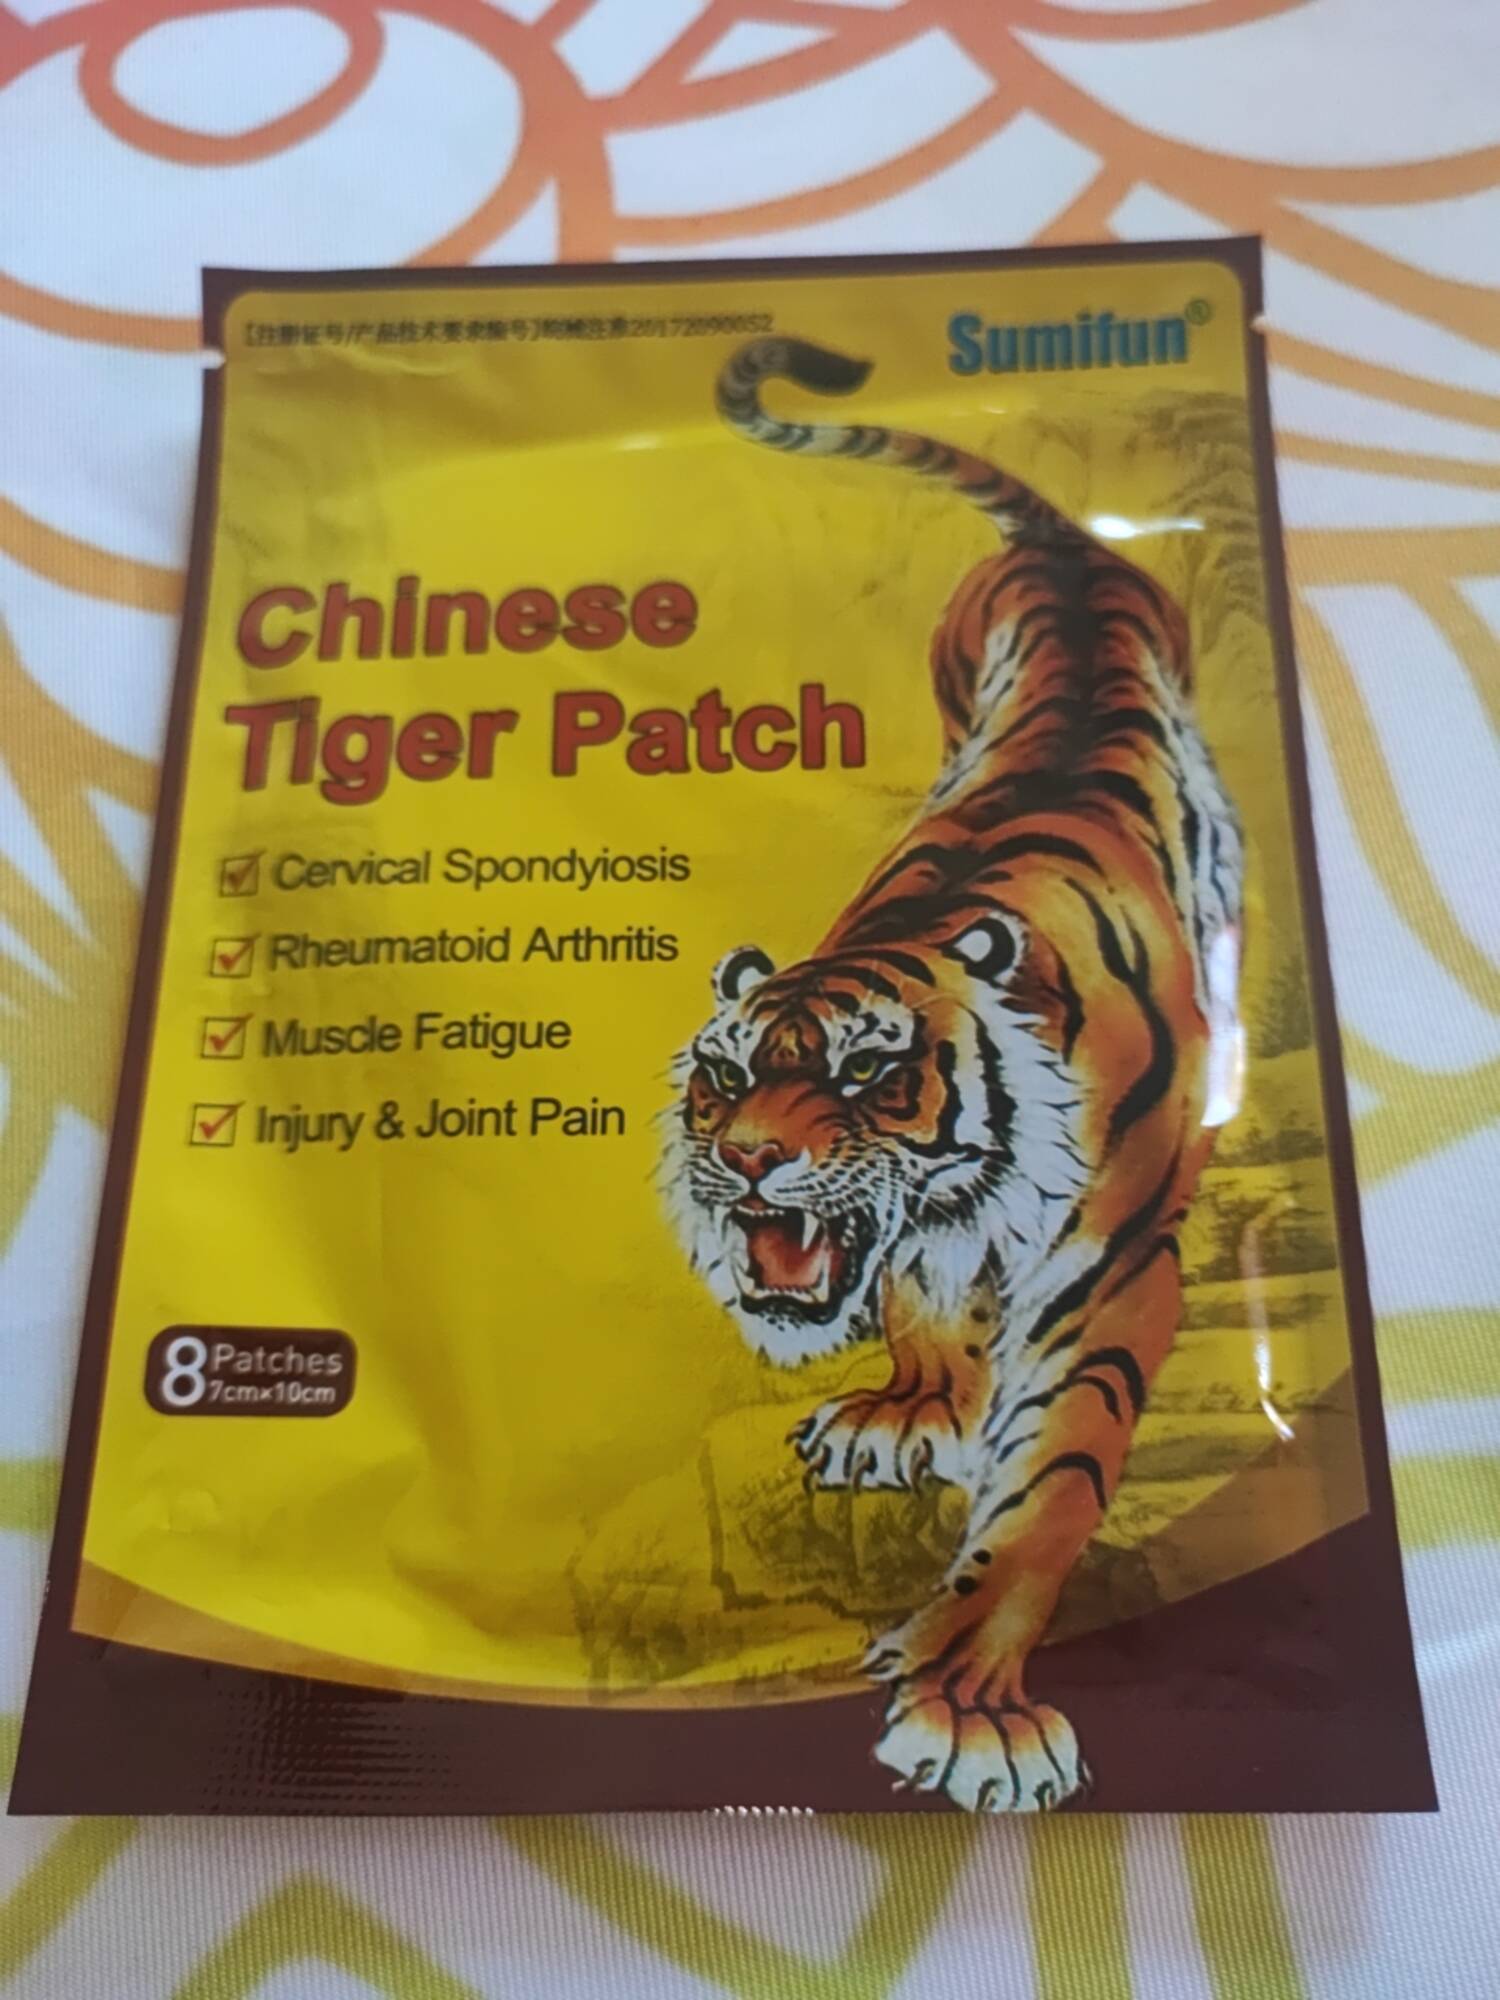 SUMIFUN - Chinese tiger patch